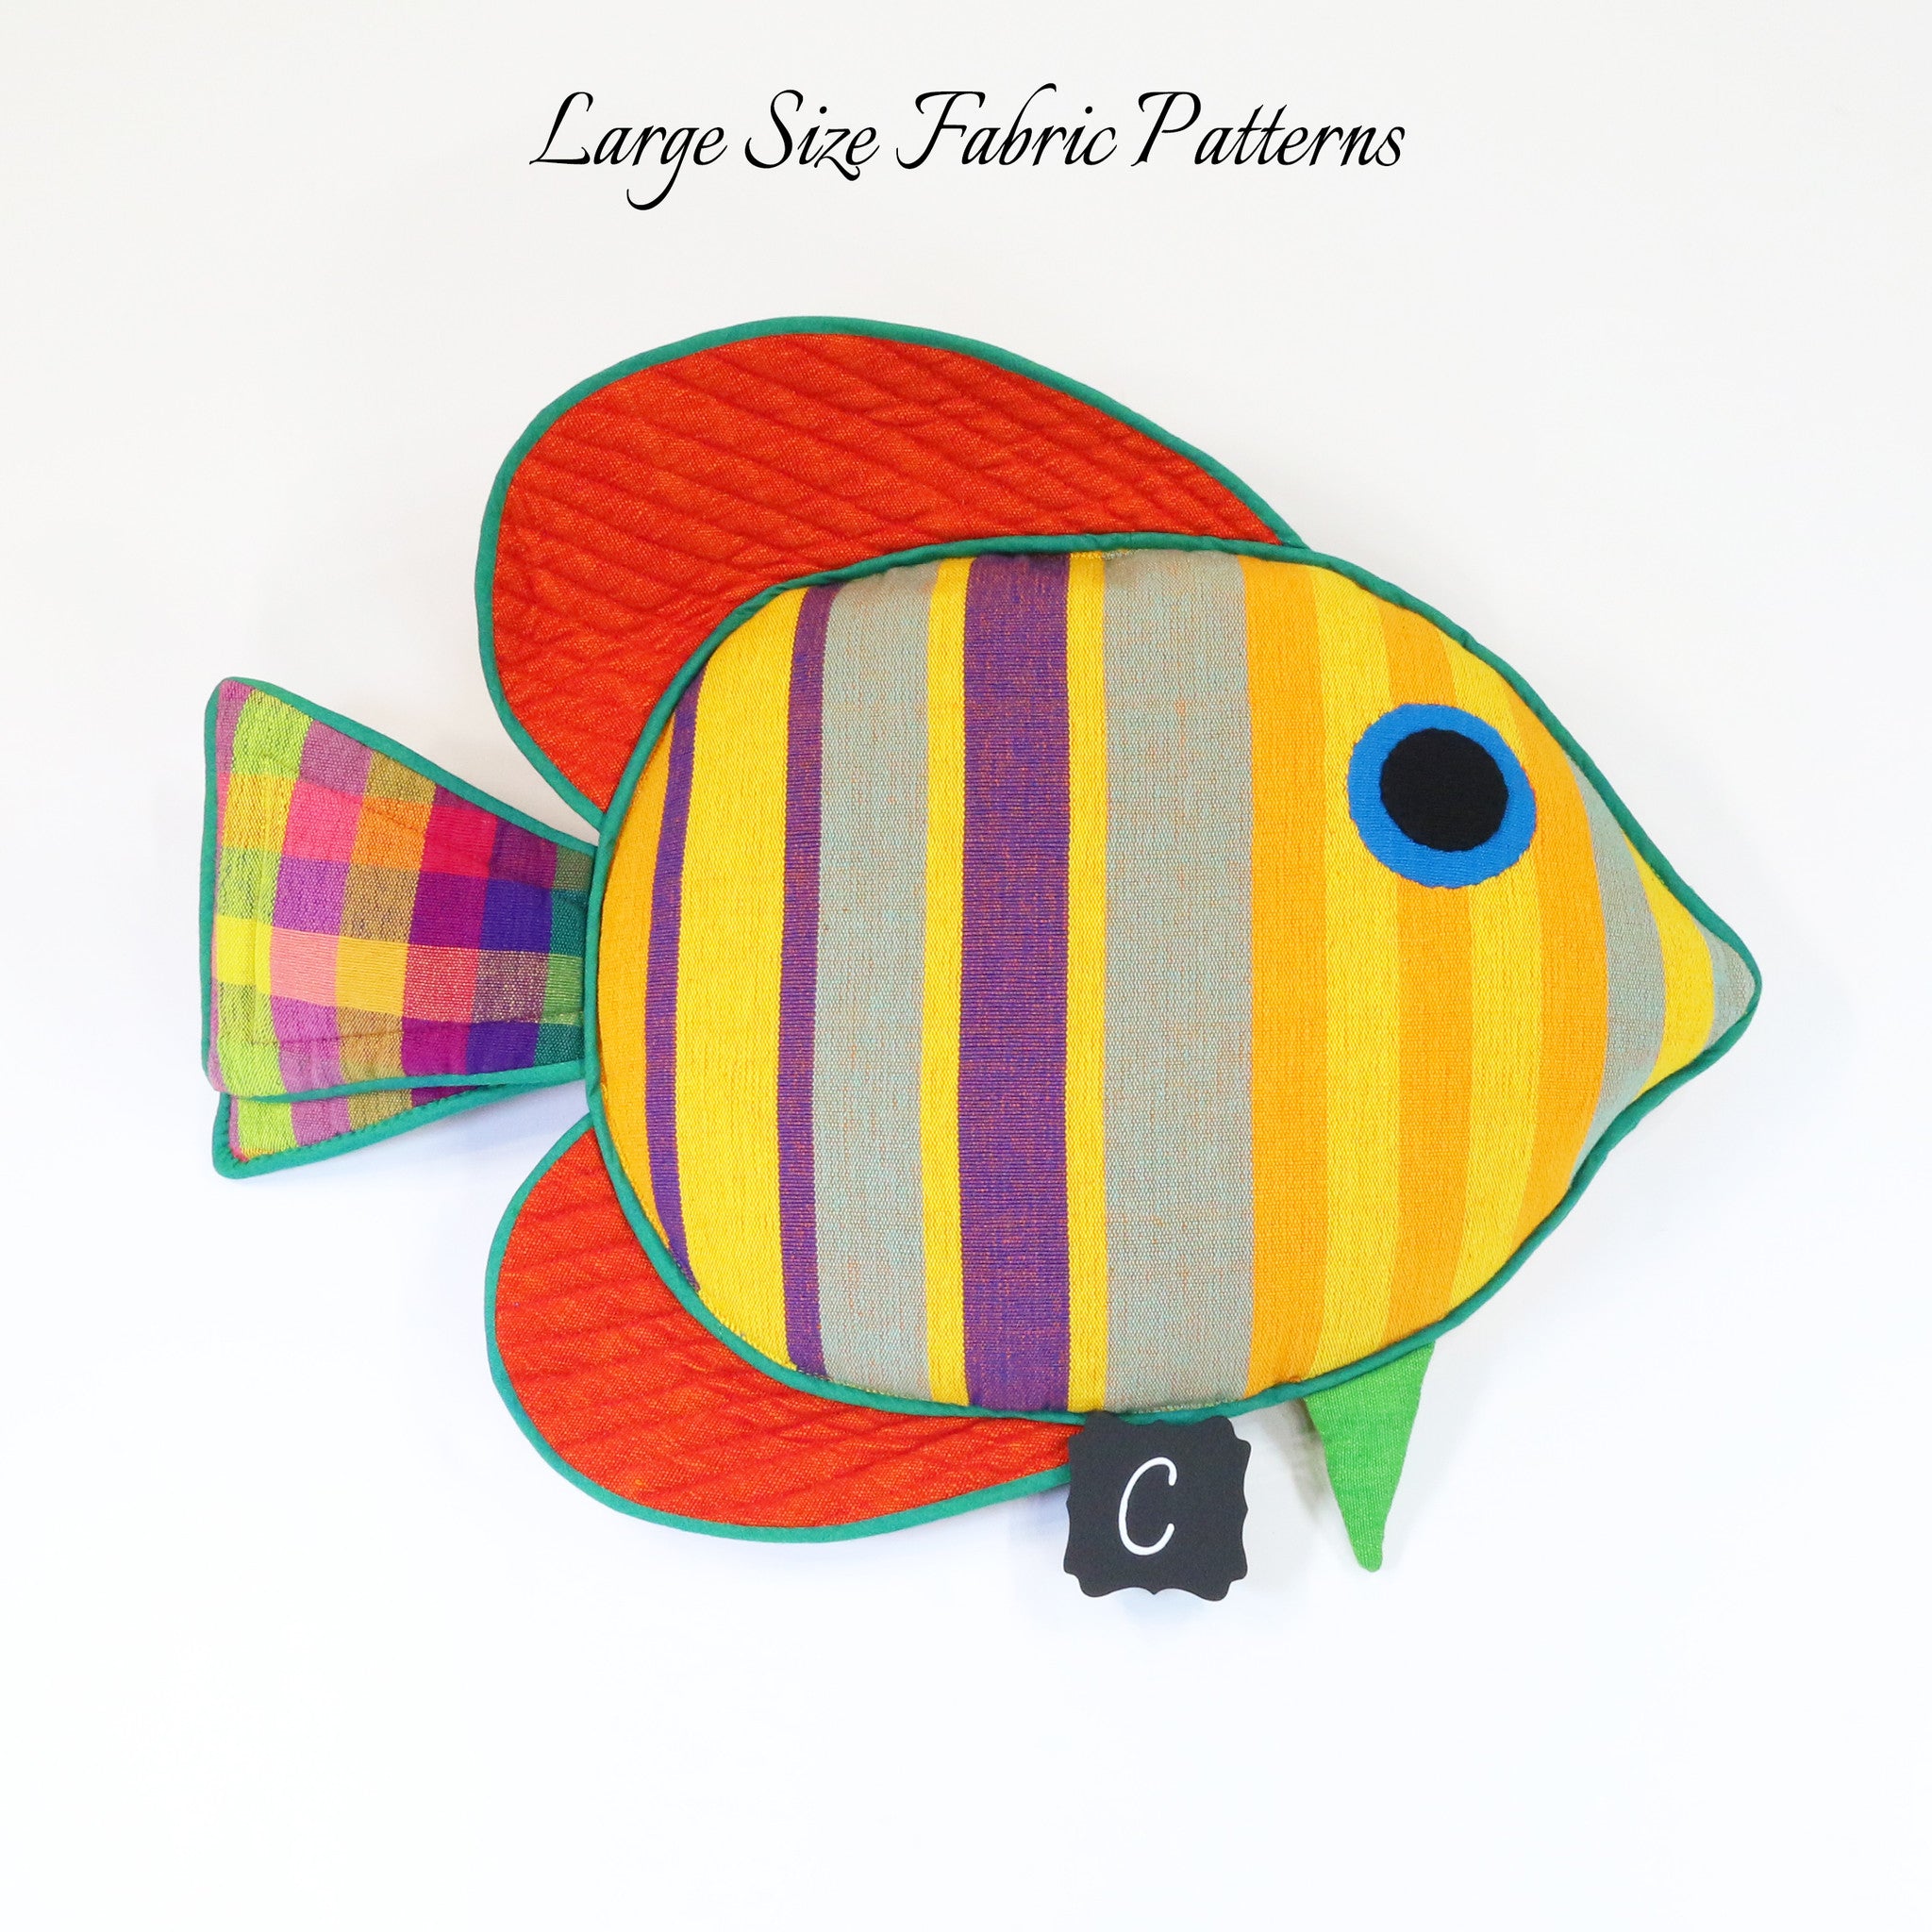 Felix, the Sail Fin Fish – large size fabric patterns shown